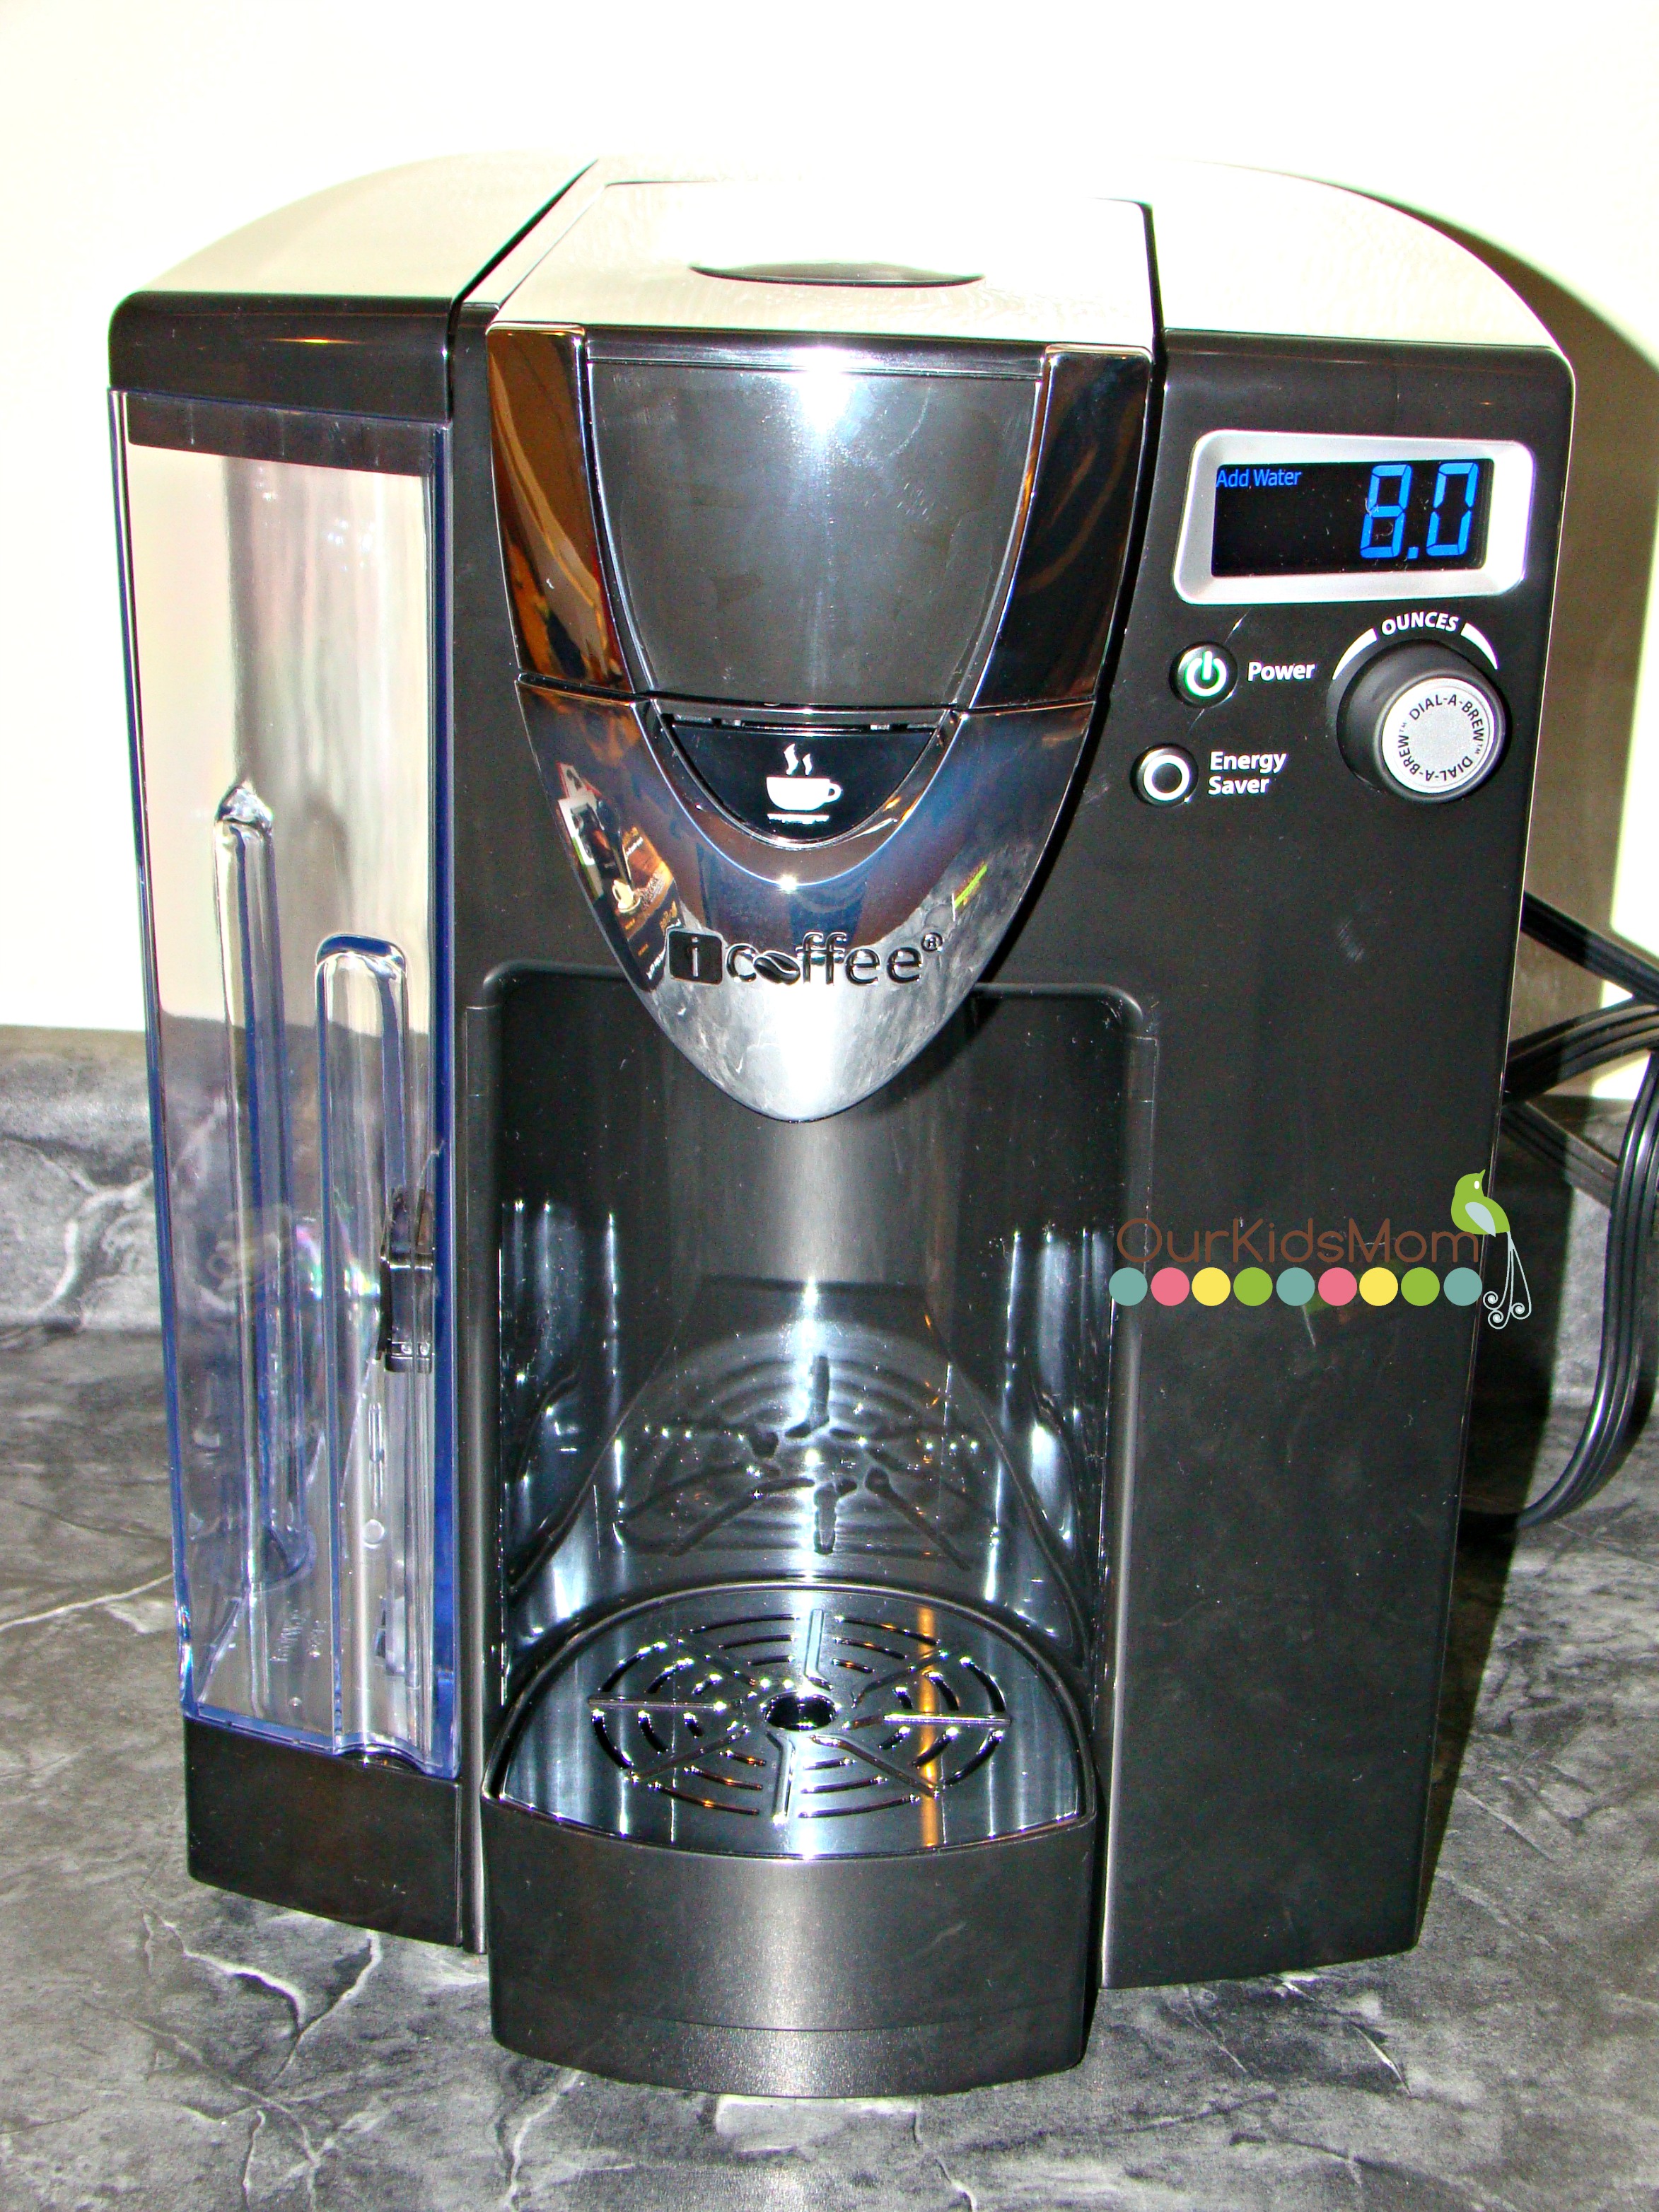 iCoffee Opus Single Serve Brewing System - OurKidsMom